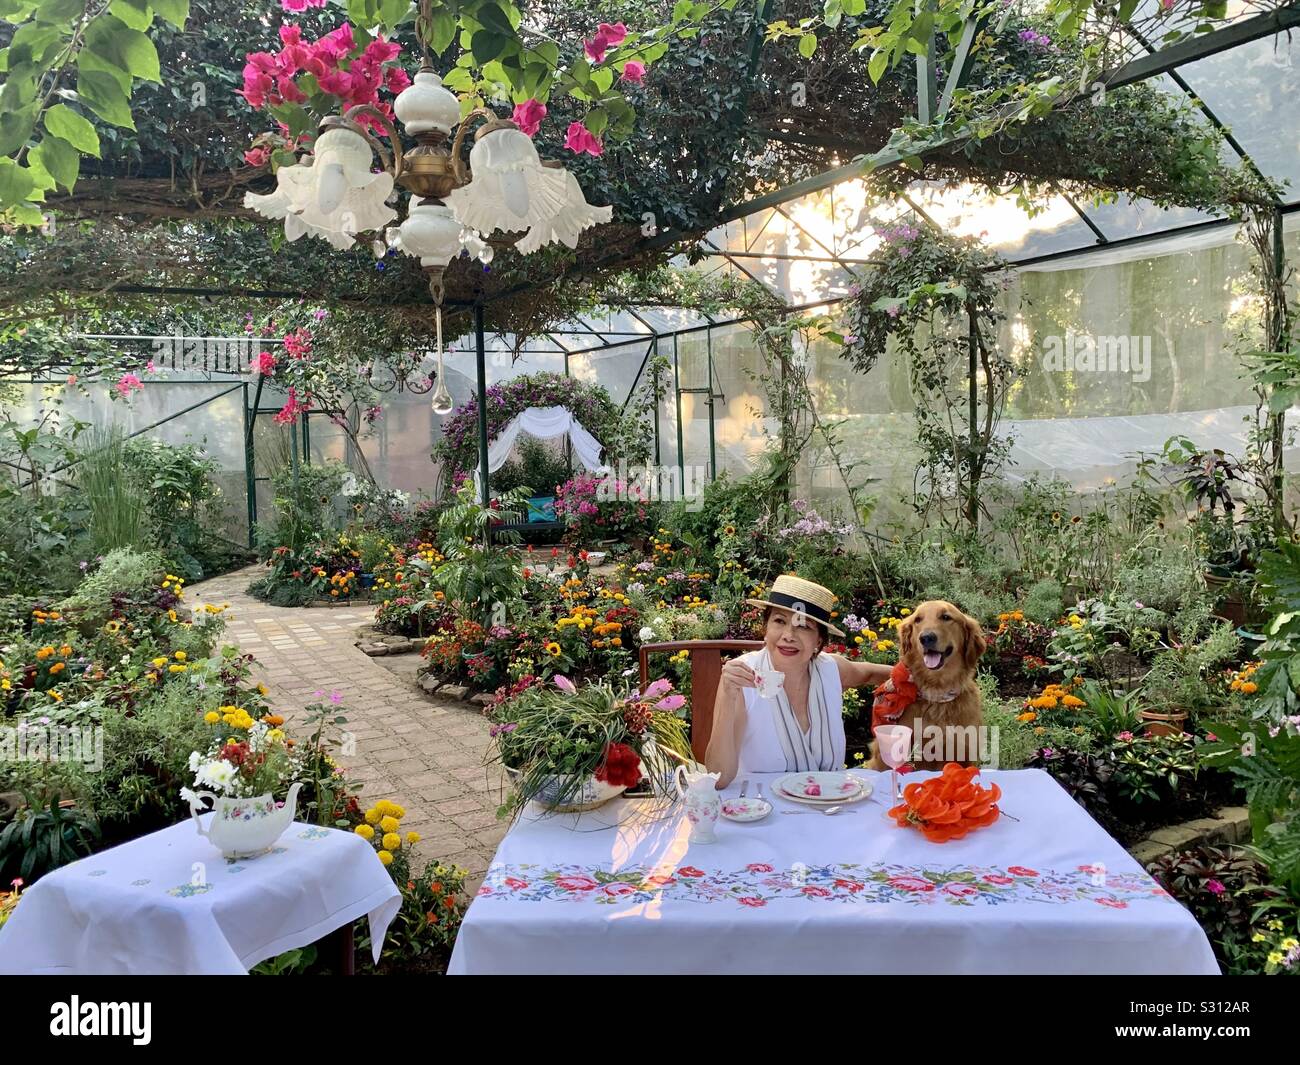 An afternoon tea with your favorite pet in a dreamy garden. The lush proposal garden at Sonya’s Garden in Alfonso, Cavite, Philippines. The luxury of afternoon tea and dining on English bone China. Stock Photo